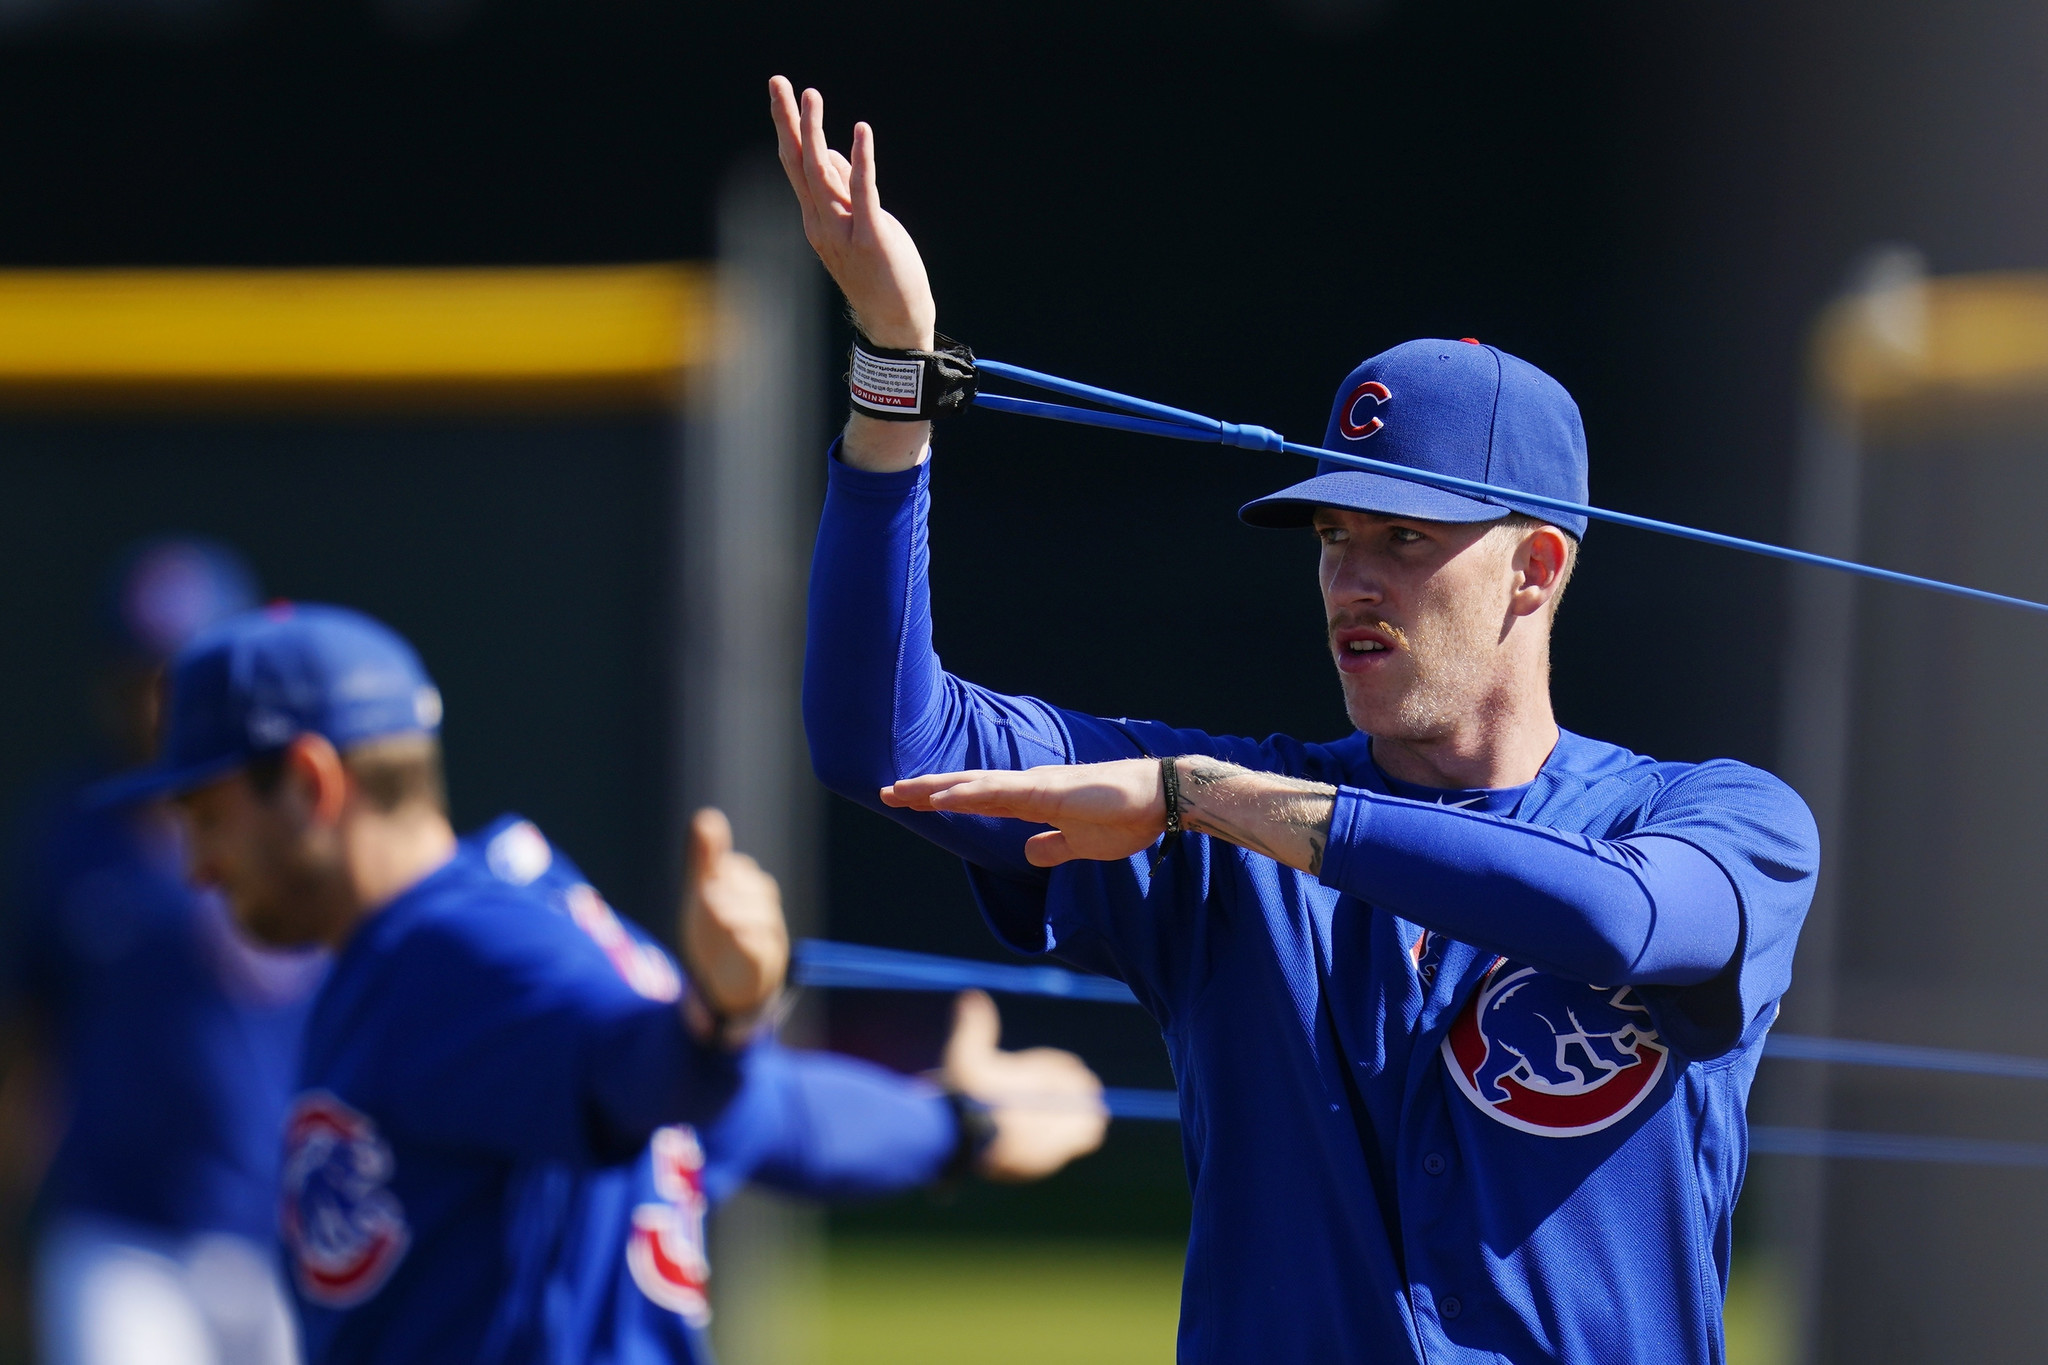 Chicago Cubs Top Prospect Pete Crow-Armstrong Has Crazy Ties to 'Little Big  League' - Fastball